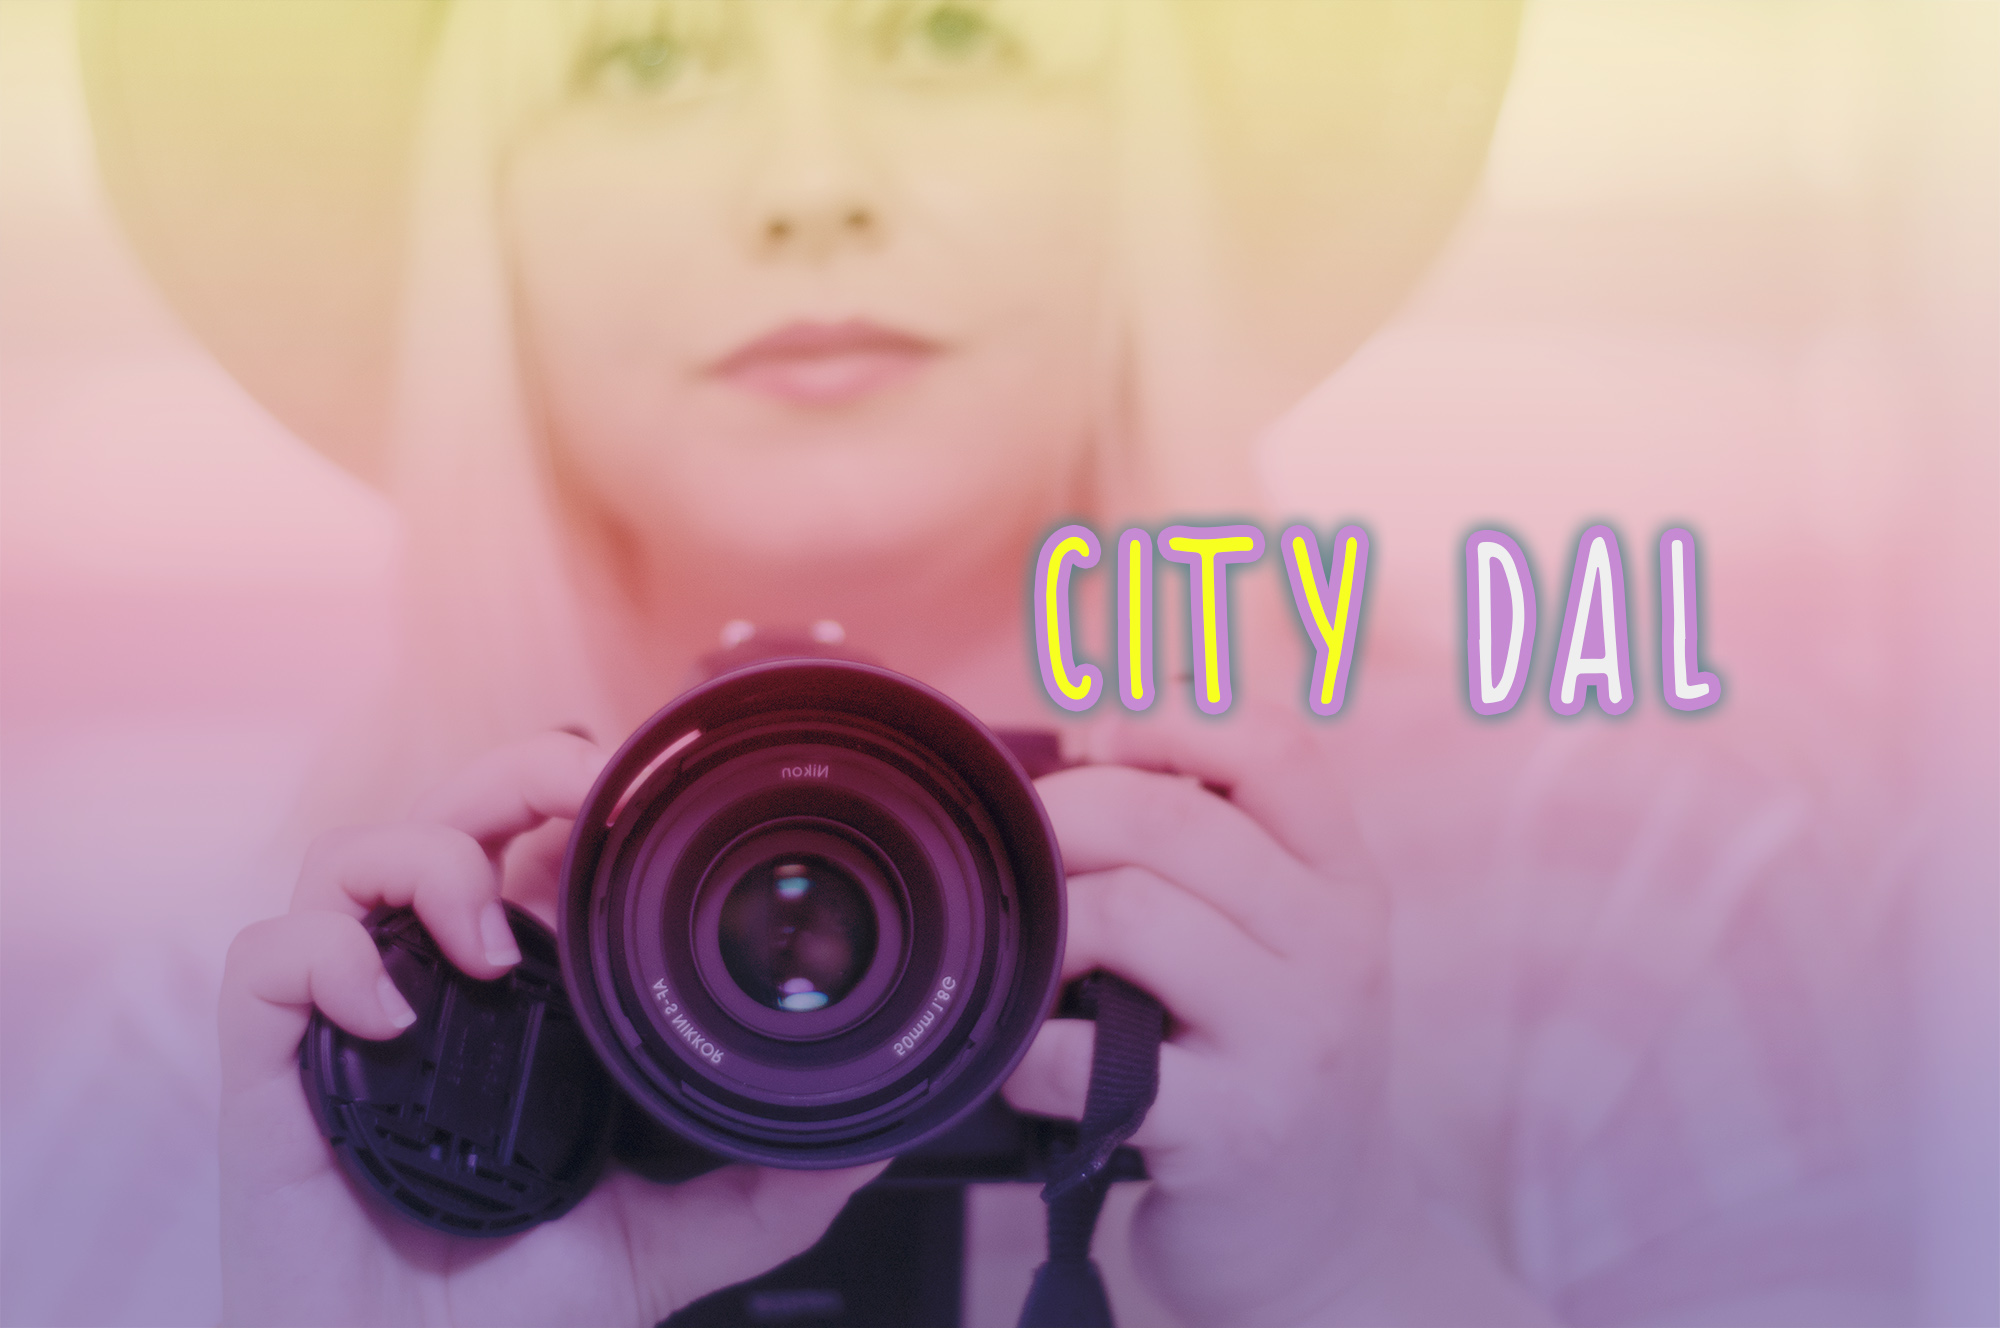 New Instagram Account @Citydal – Dedicated to my Artistic Photography